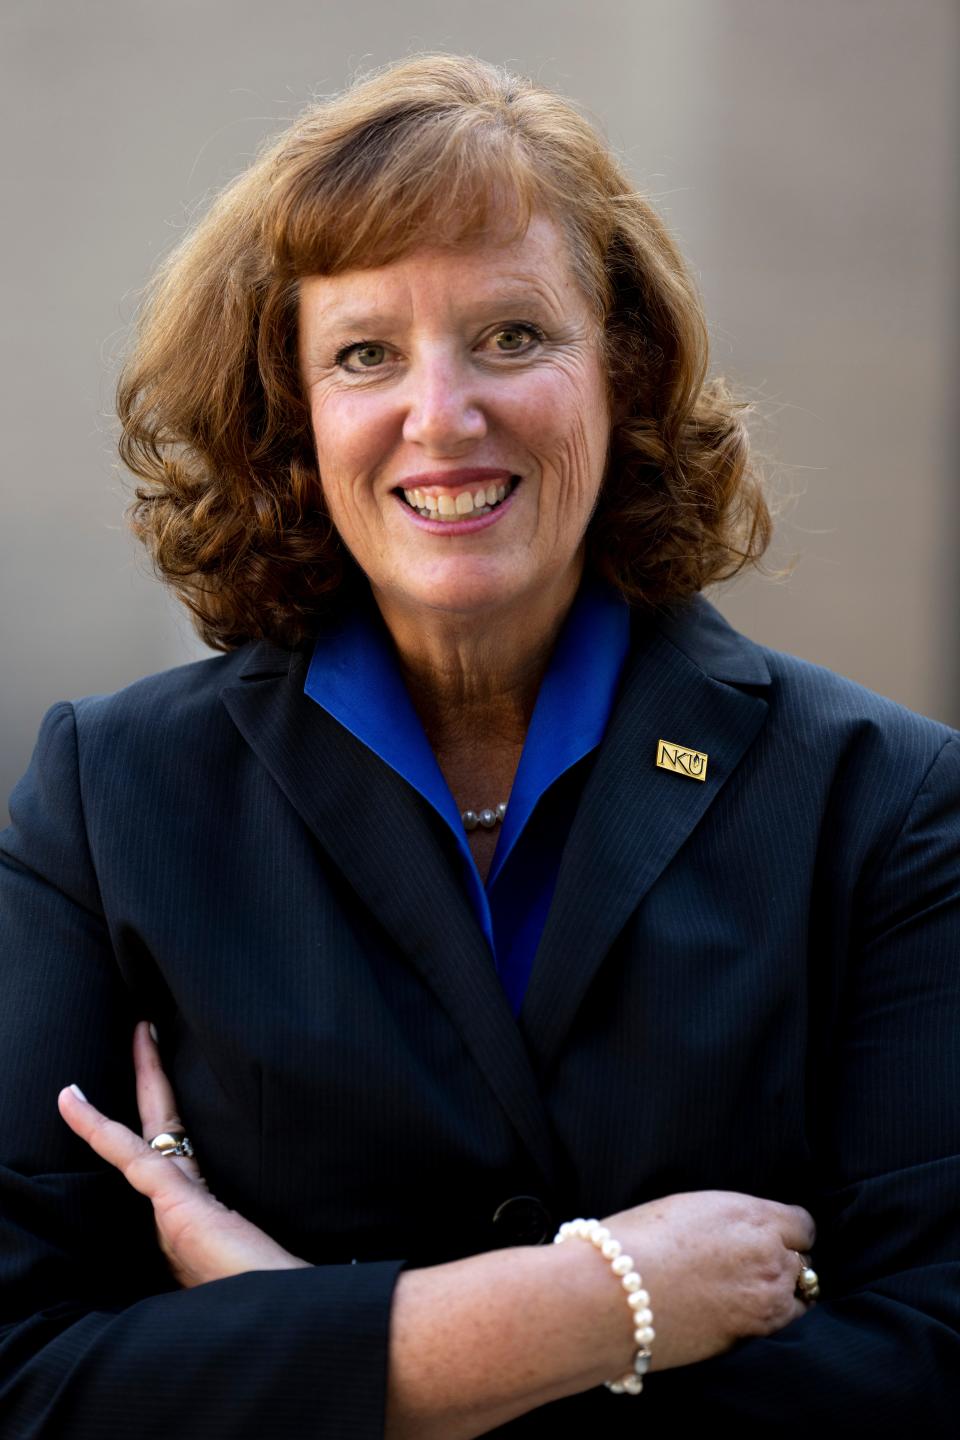 Northern Kentucky University President Cady Short-Thompson plans to increase enrollment during her tenure. She wants to "help NKU to not be such a secret," she said, by doubling down on recruitment efforts.